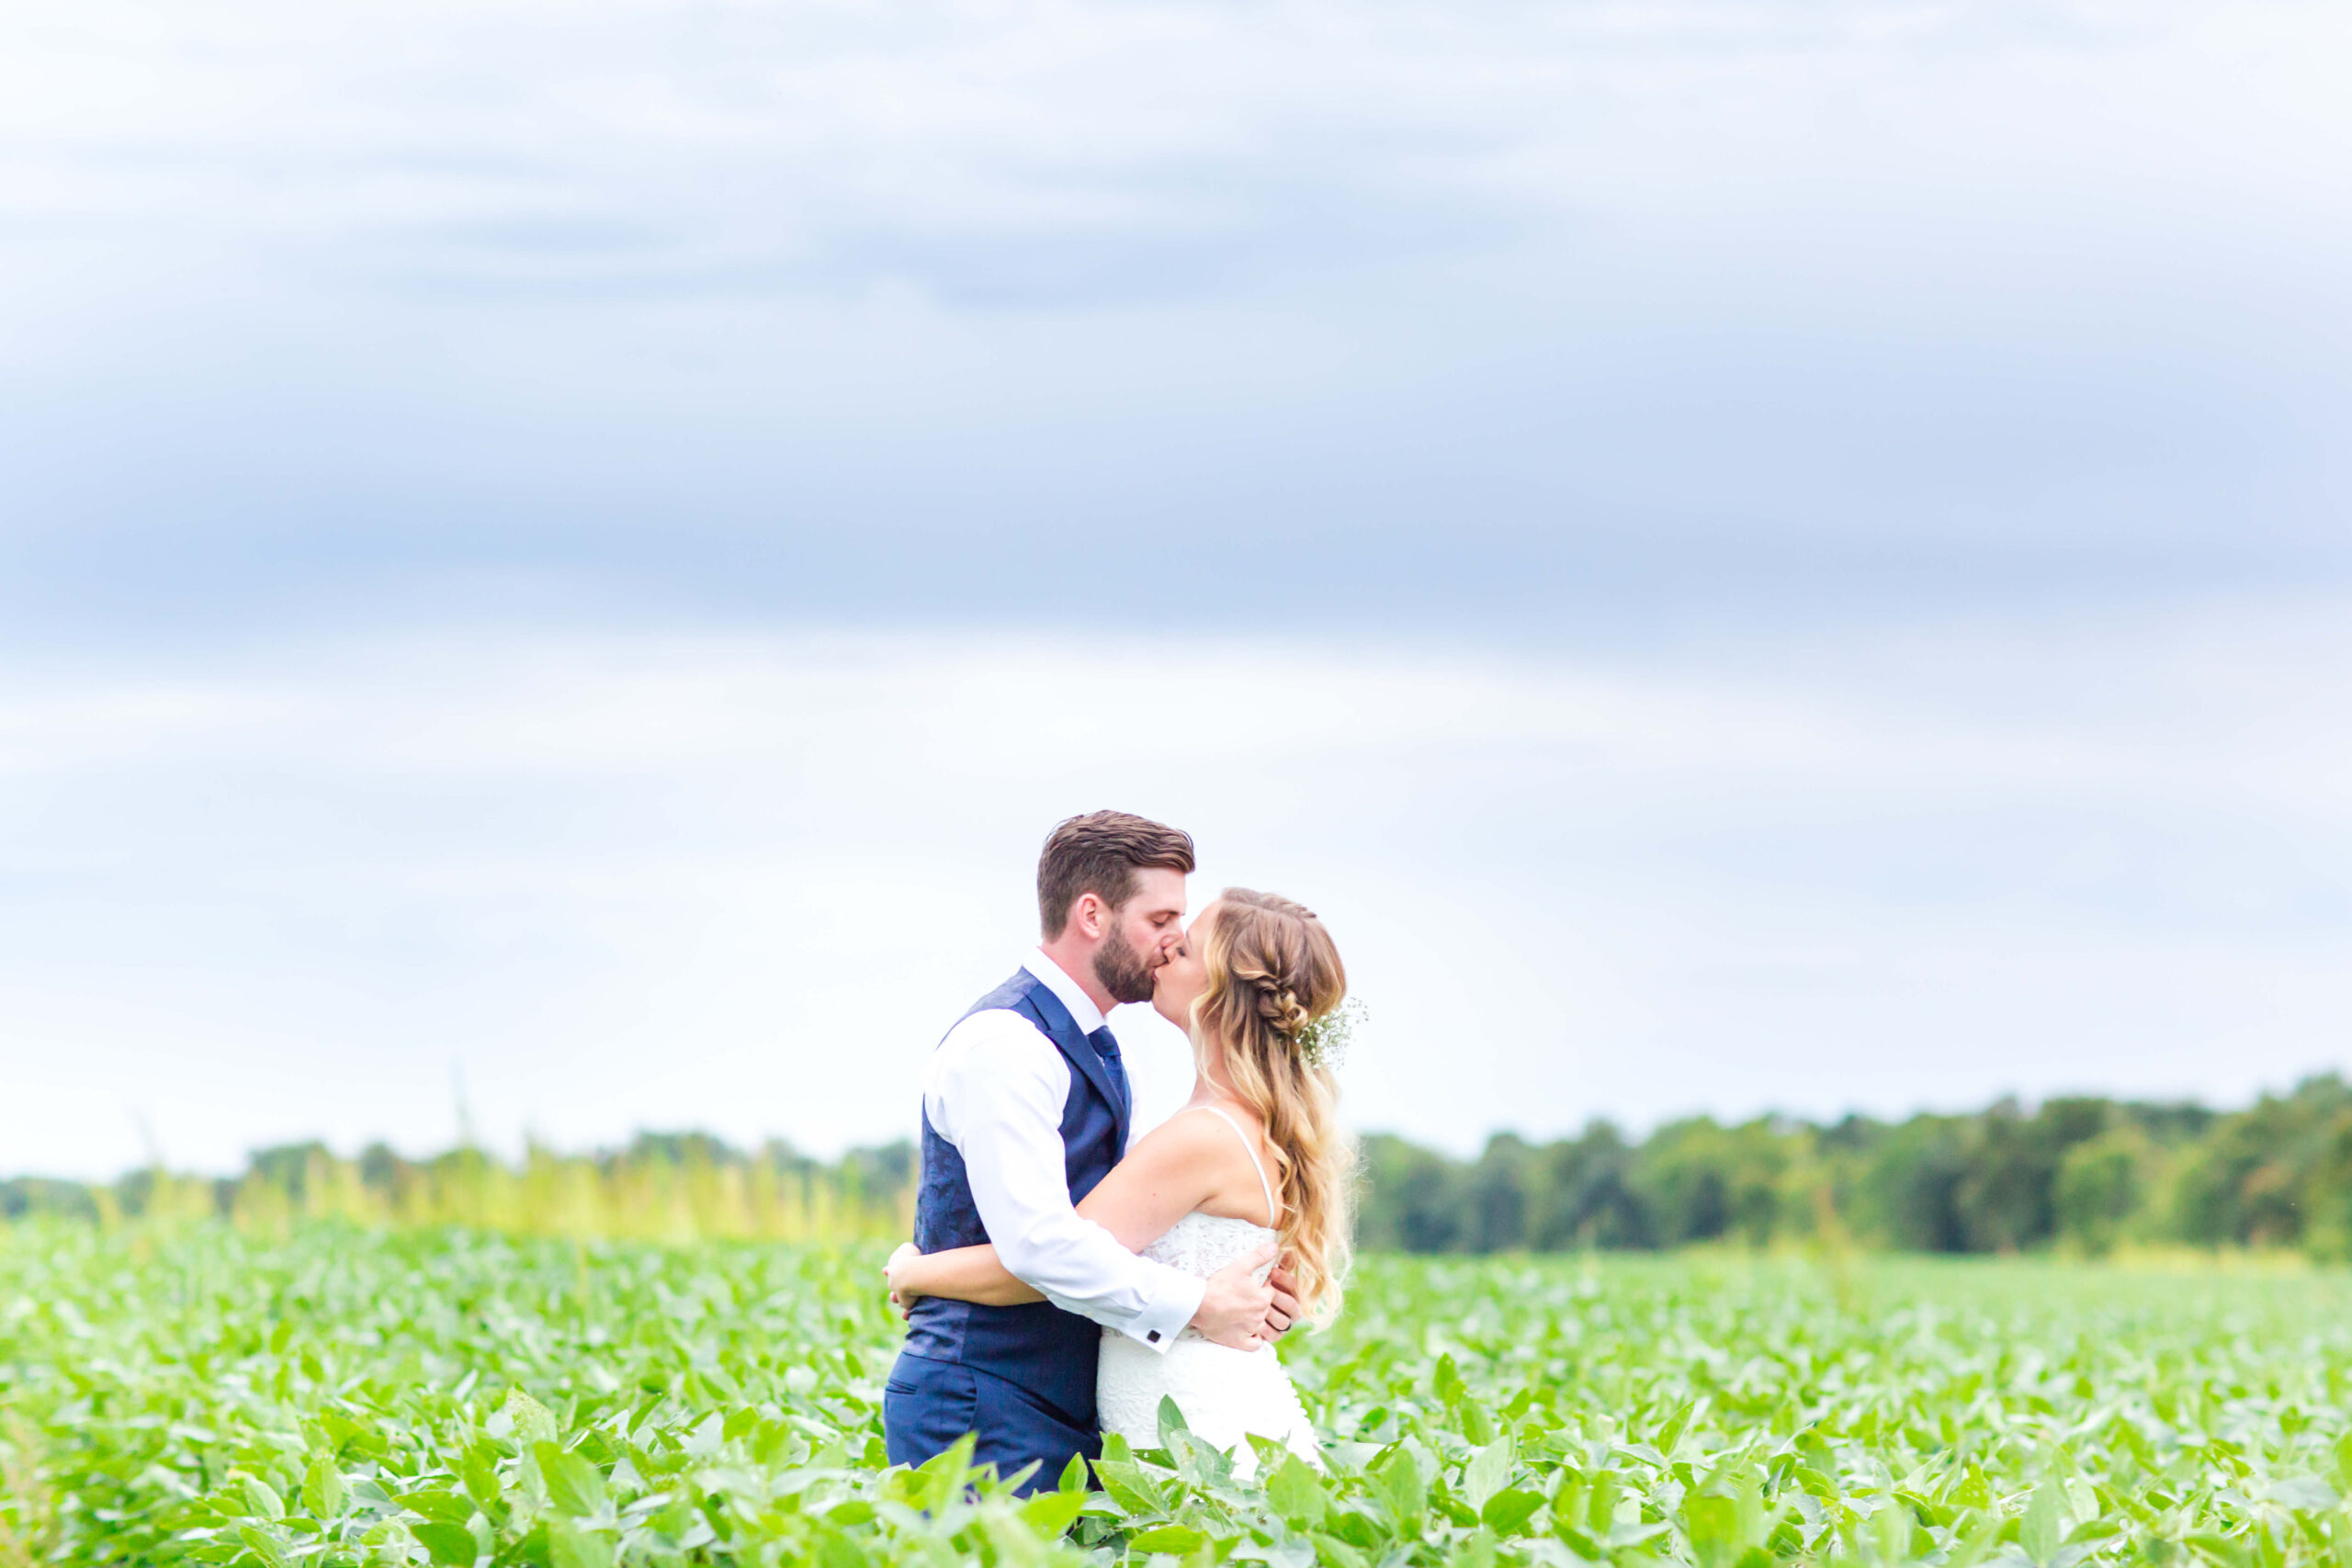 Bride and groom in green field with tall grass